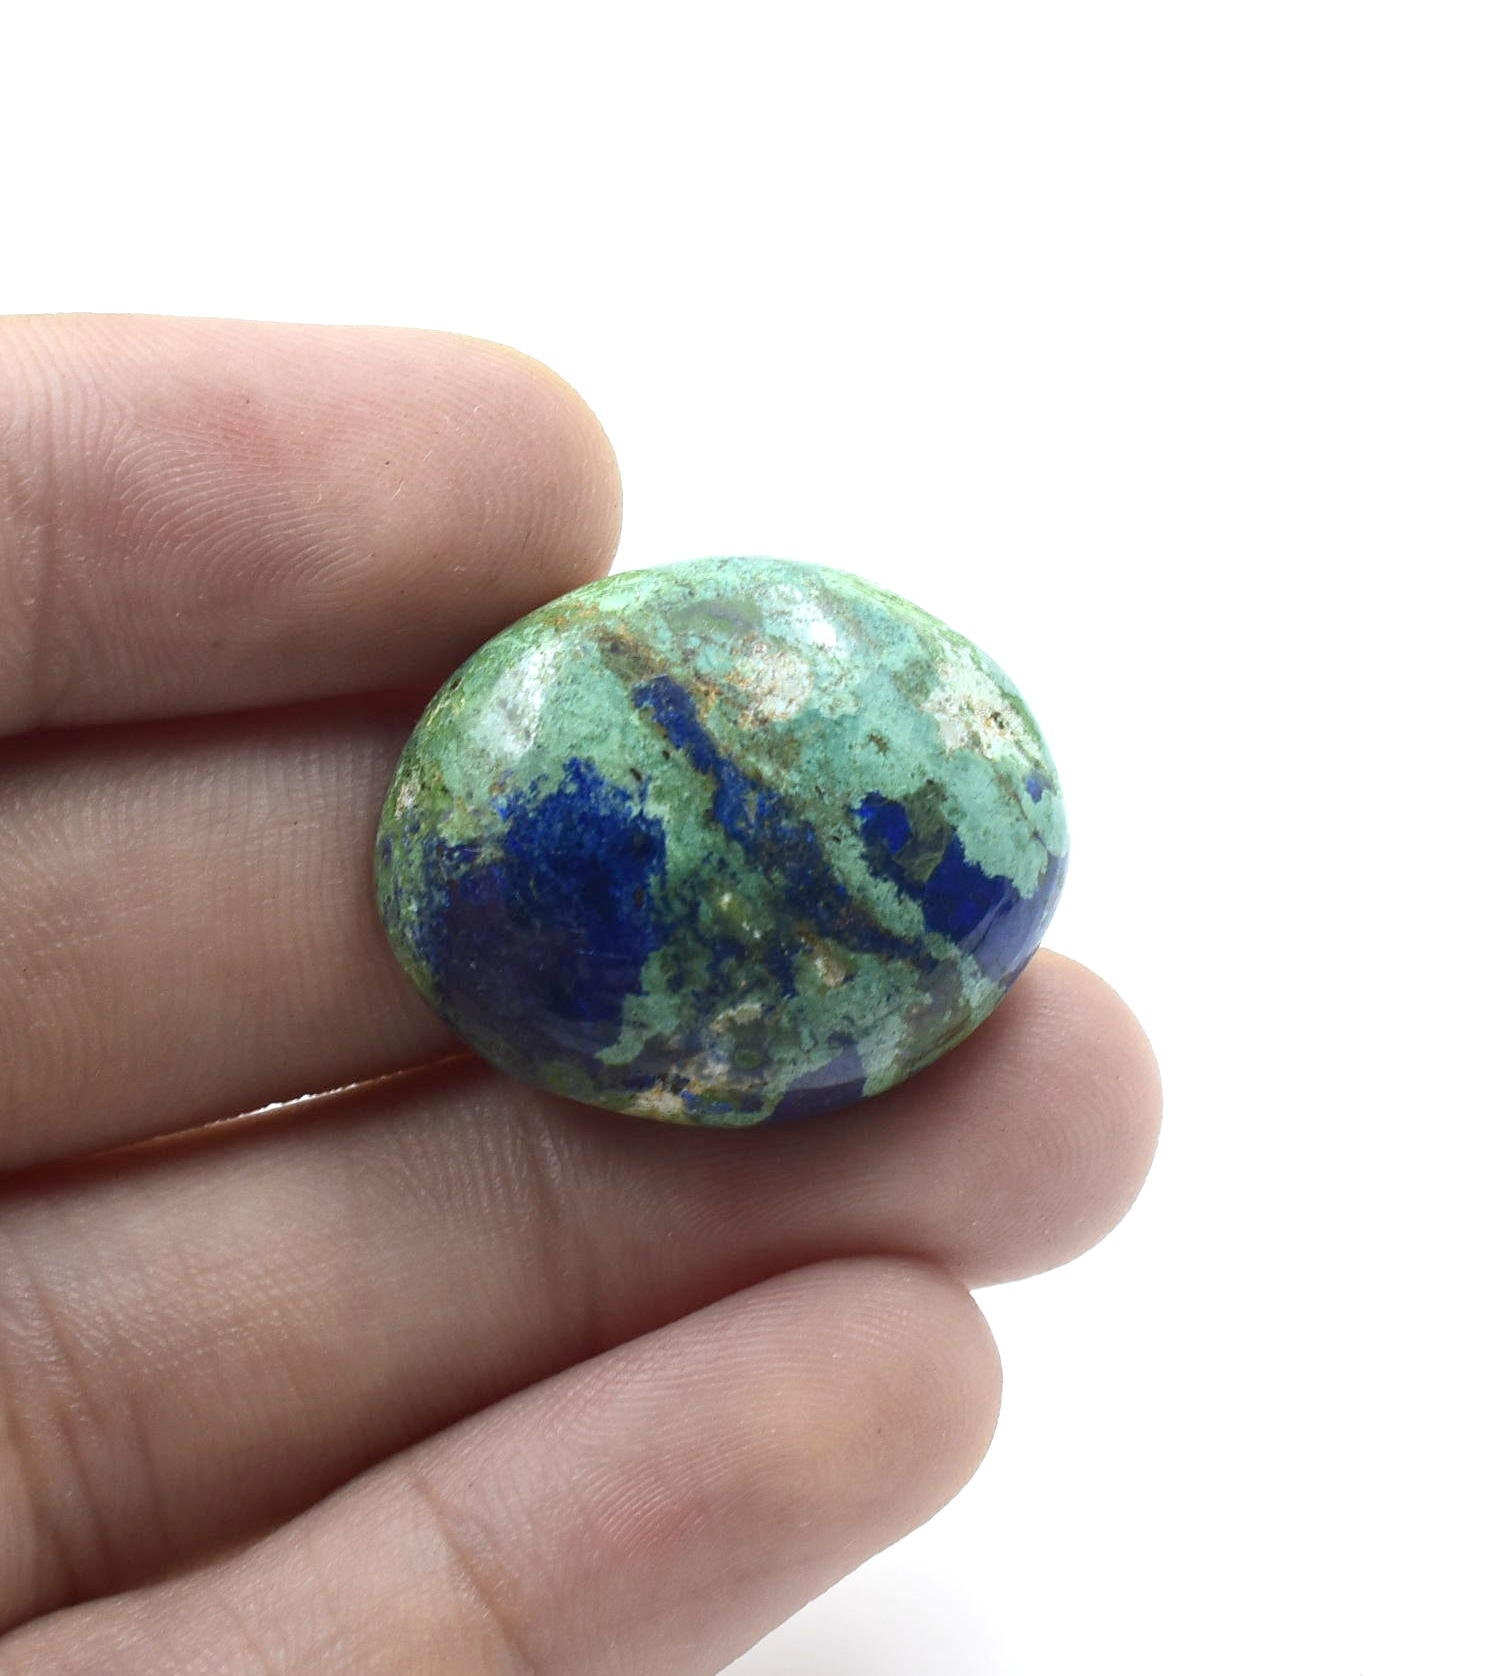 100% Natural Azurite Malachite Cabochon Good quality stone Beautiful Art Making for jewellery Ring 44.50 CARAT 26X22 MM | Save 33% - Rajasthan Living 12